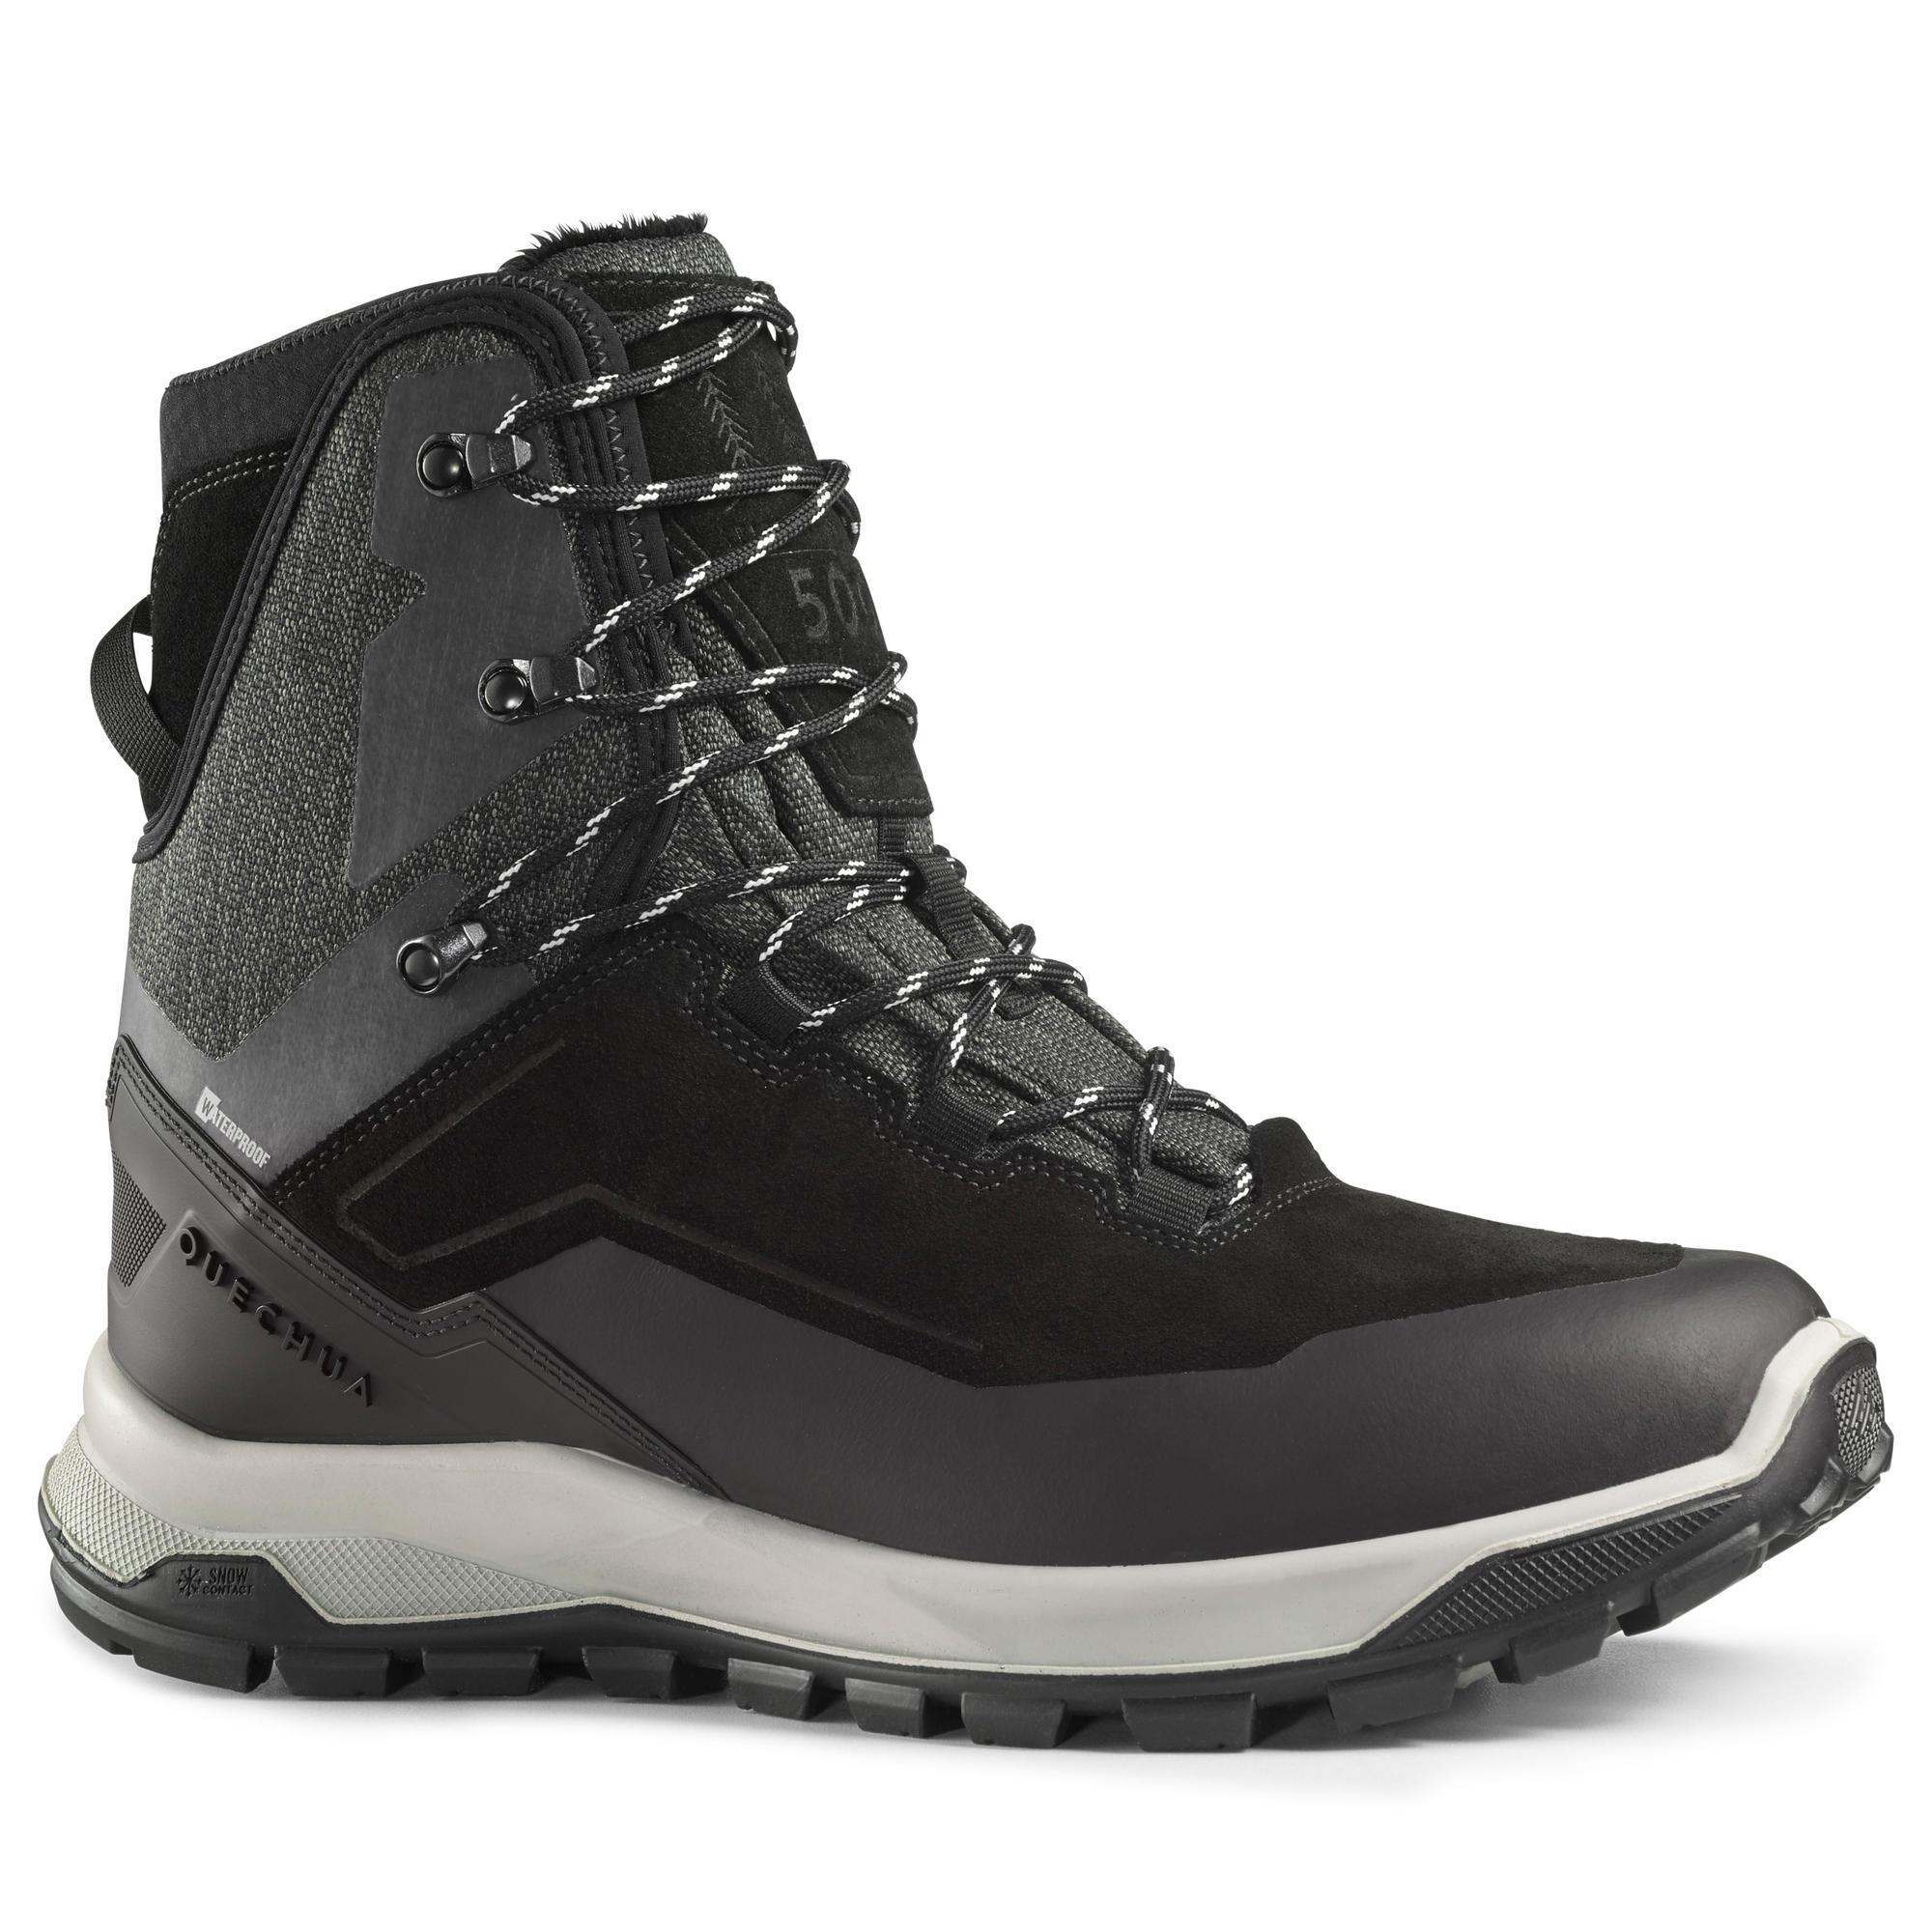 ascent safety boots